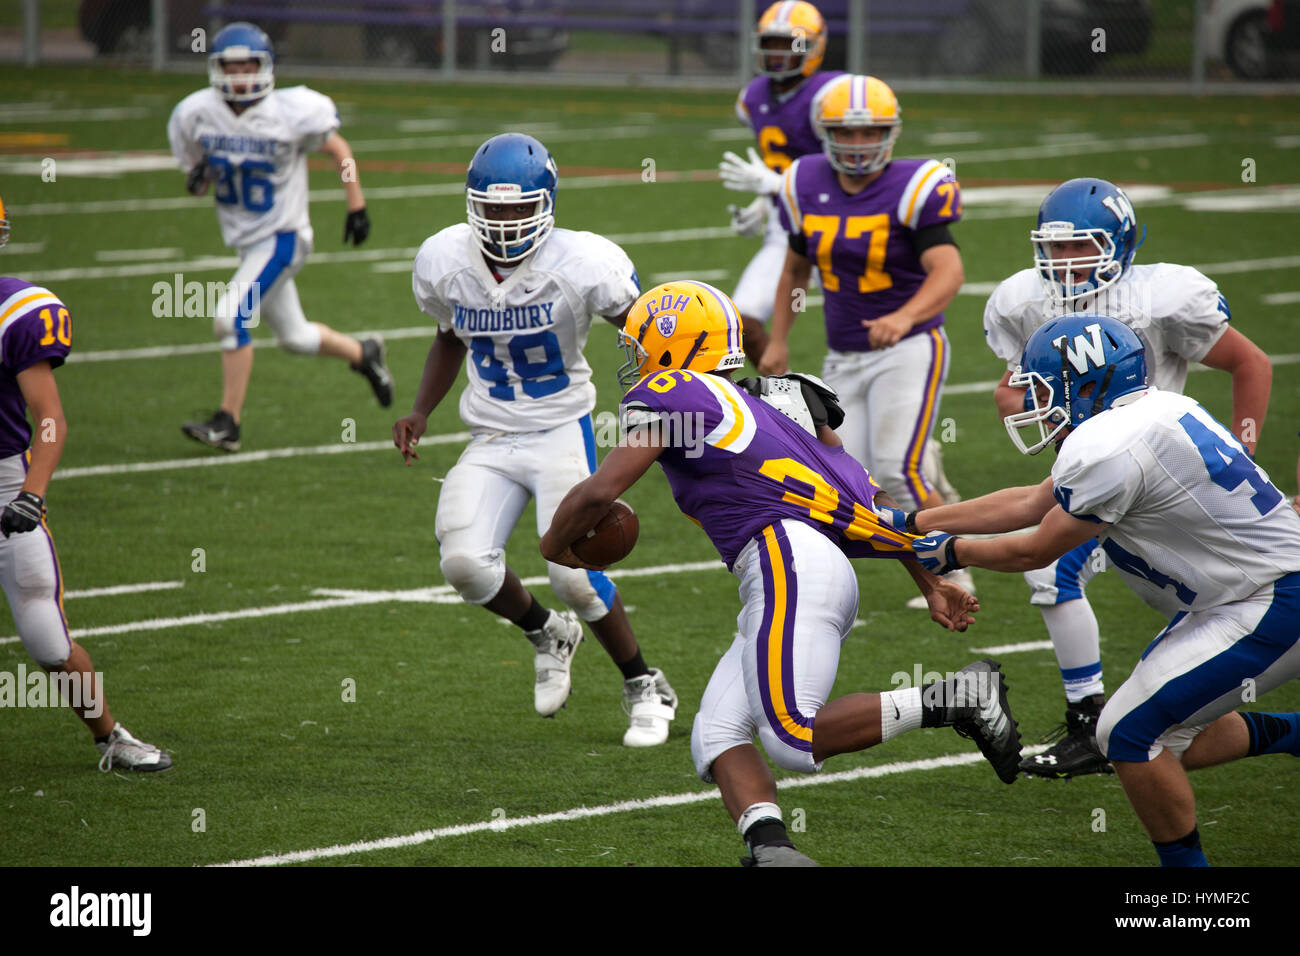 High school football player running the ball and about to go down with shirt tackle. Cretin-Derham Hall (purple) VS Woodbury. St Paul Minnesota MN USA Stock Photo